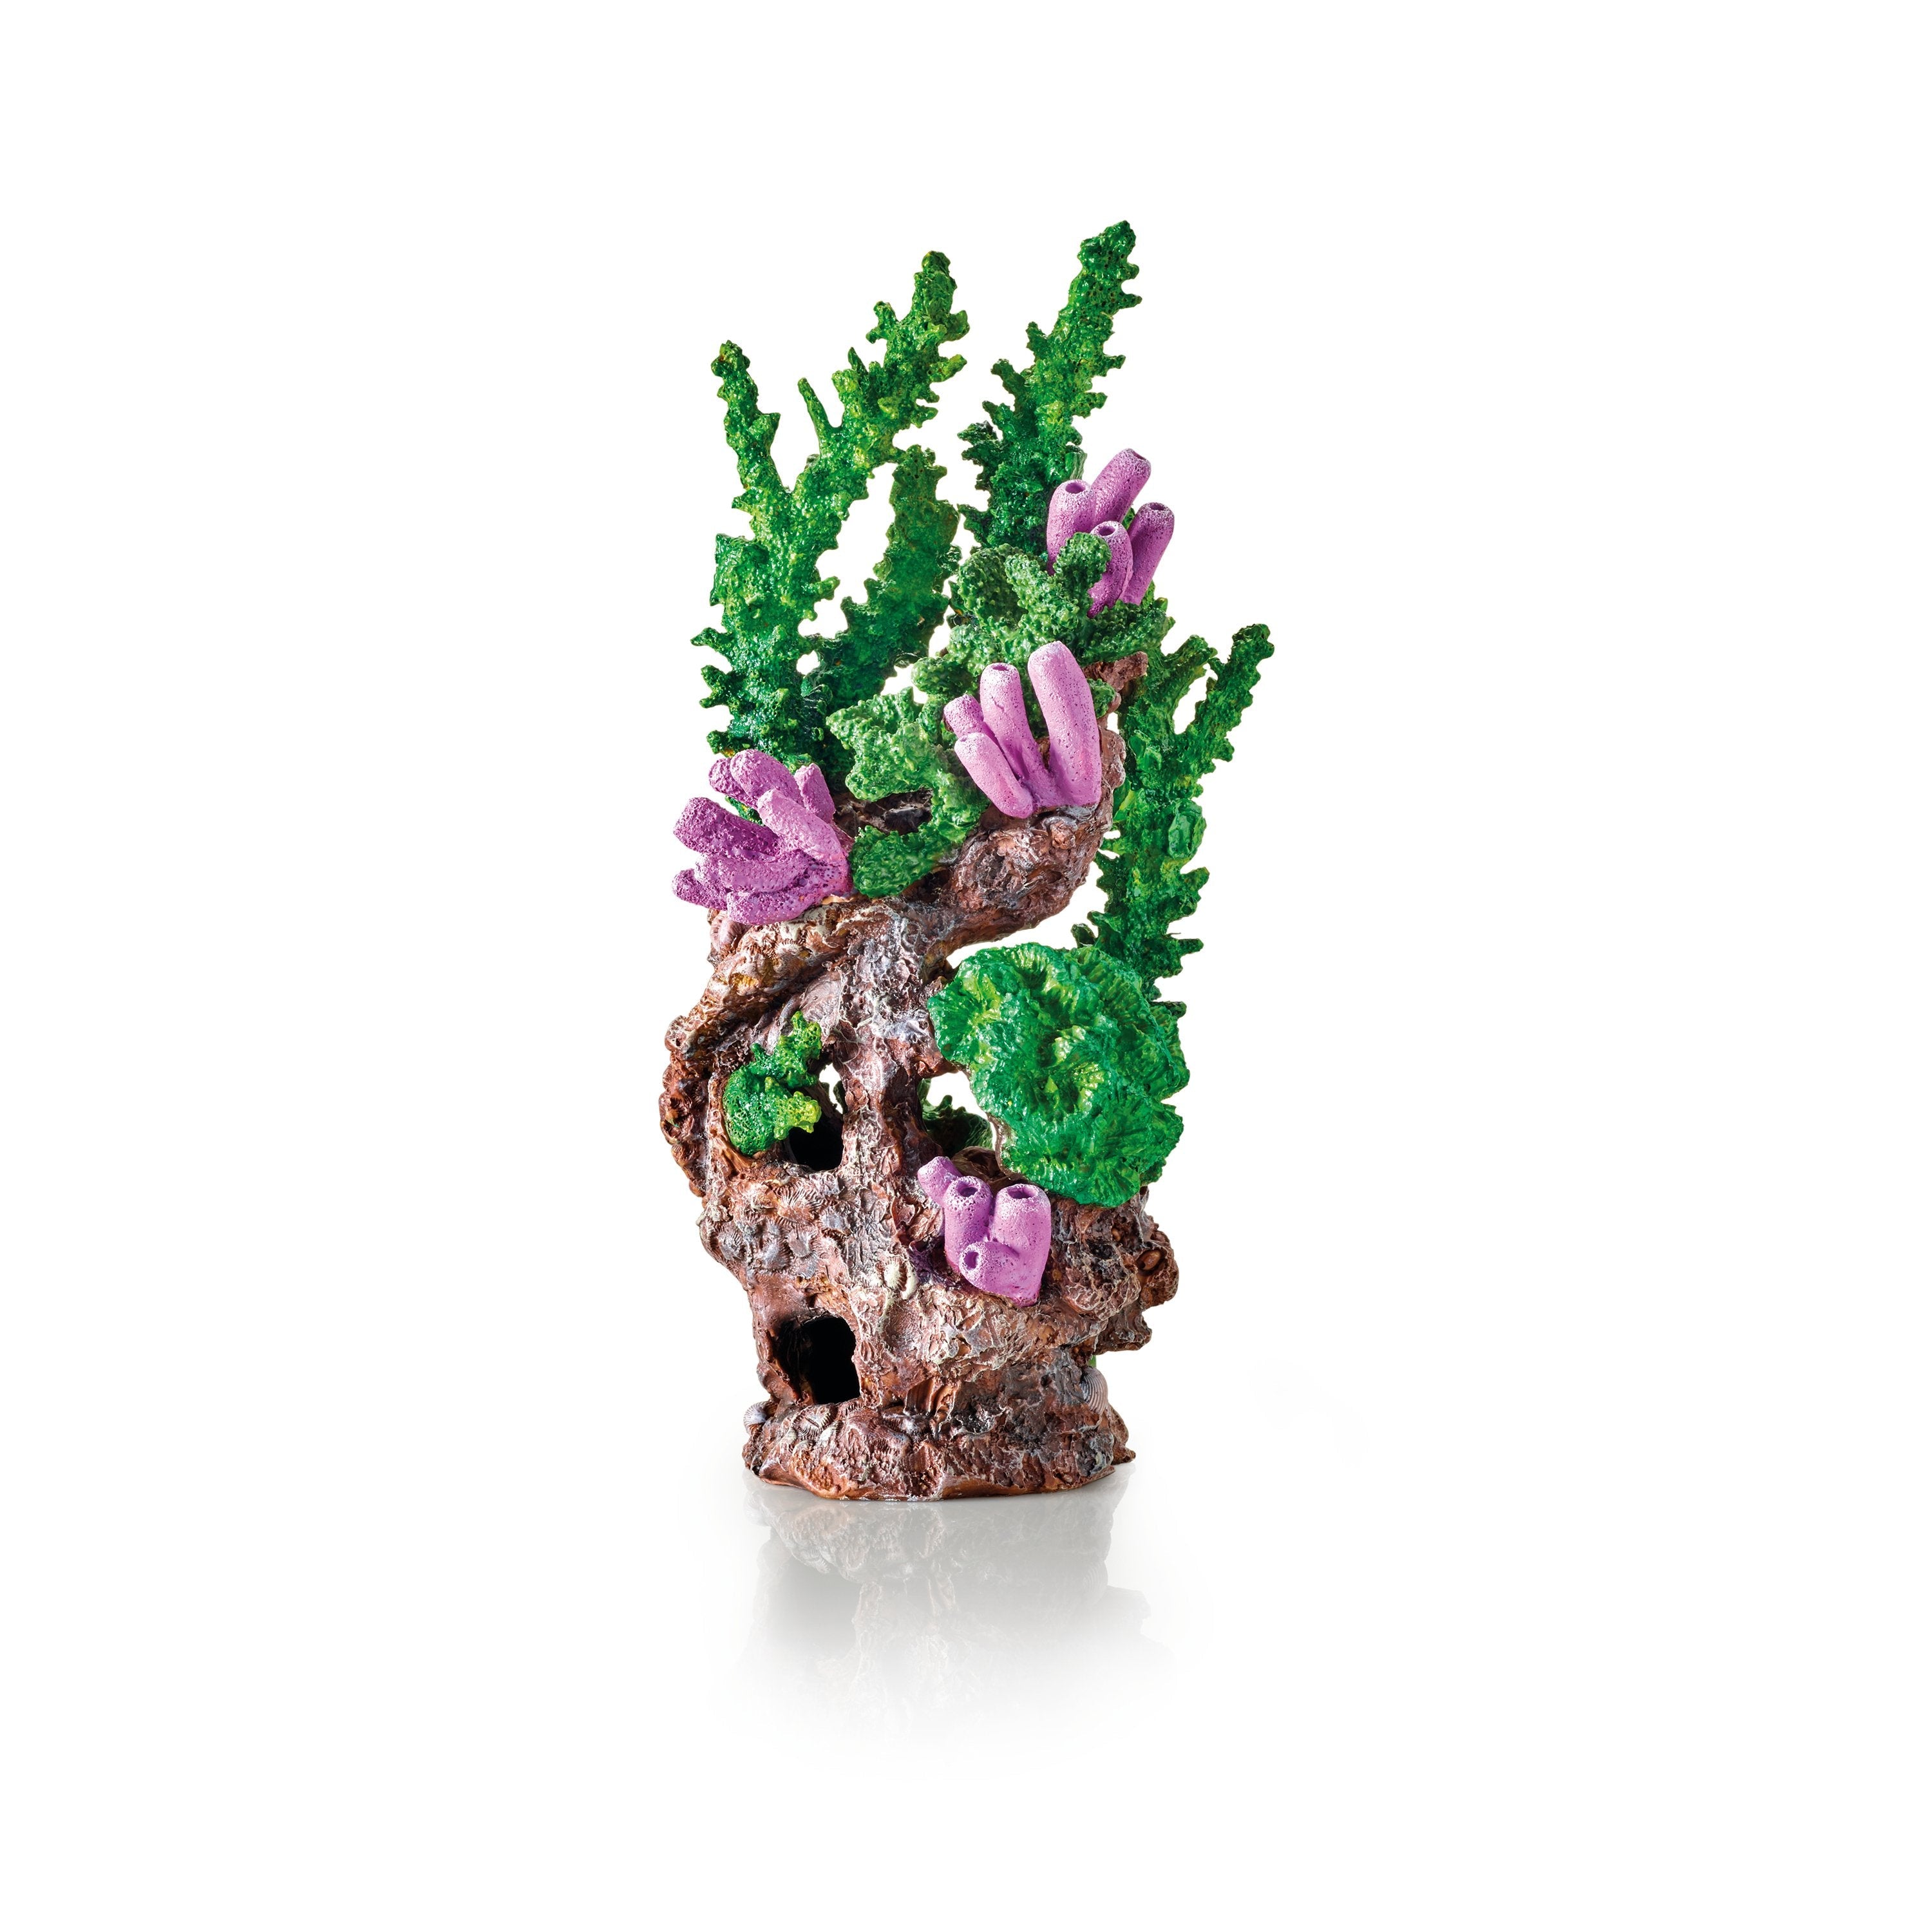 Reef Sculpture Available in Green